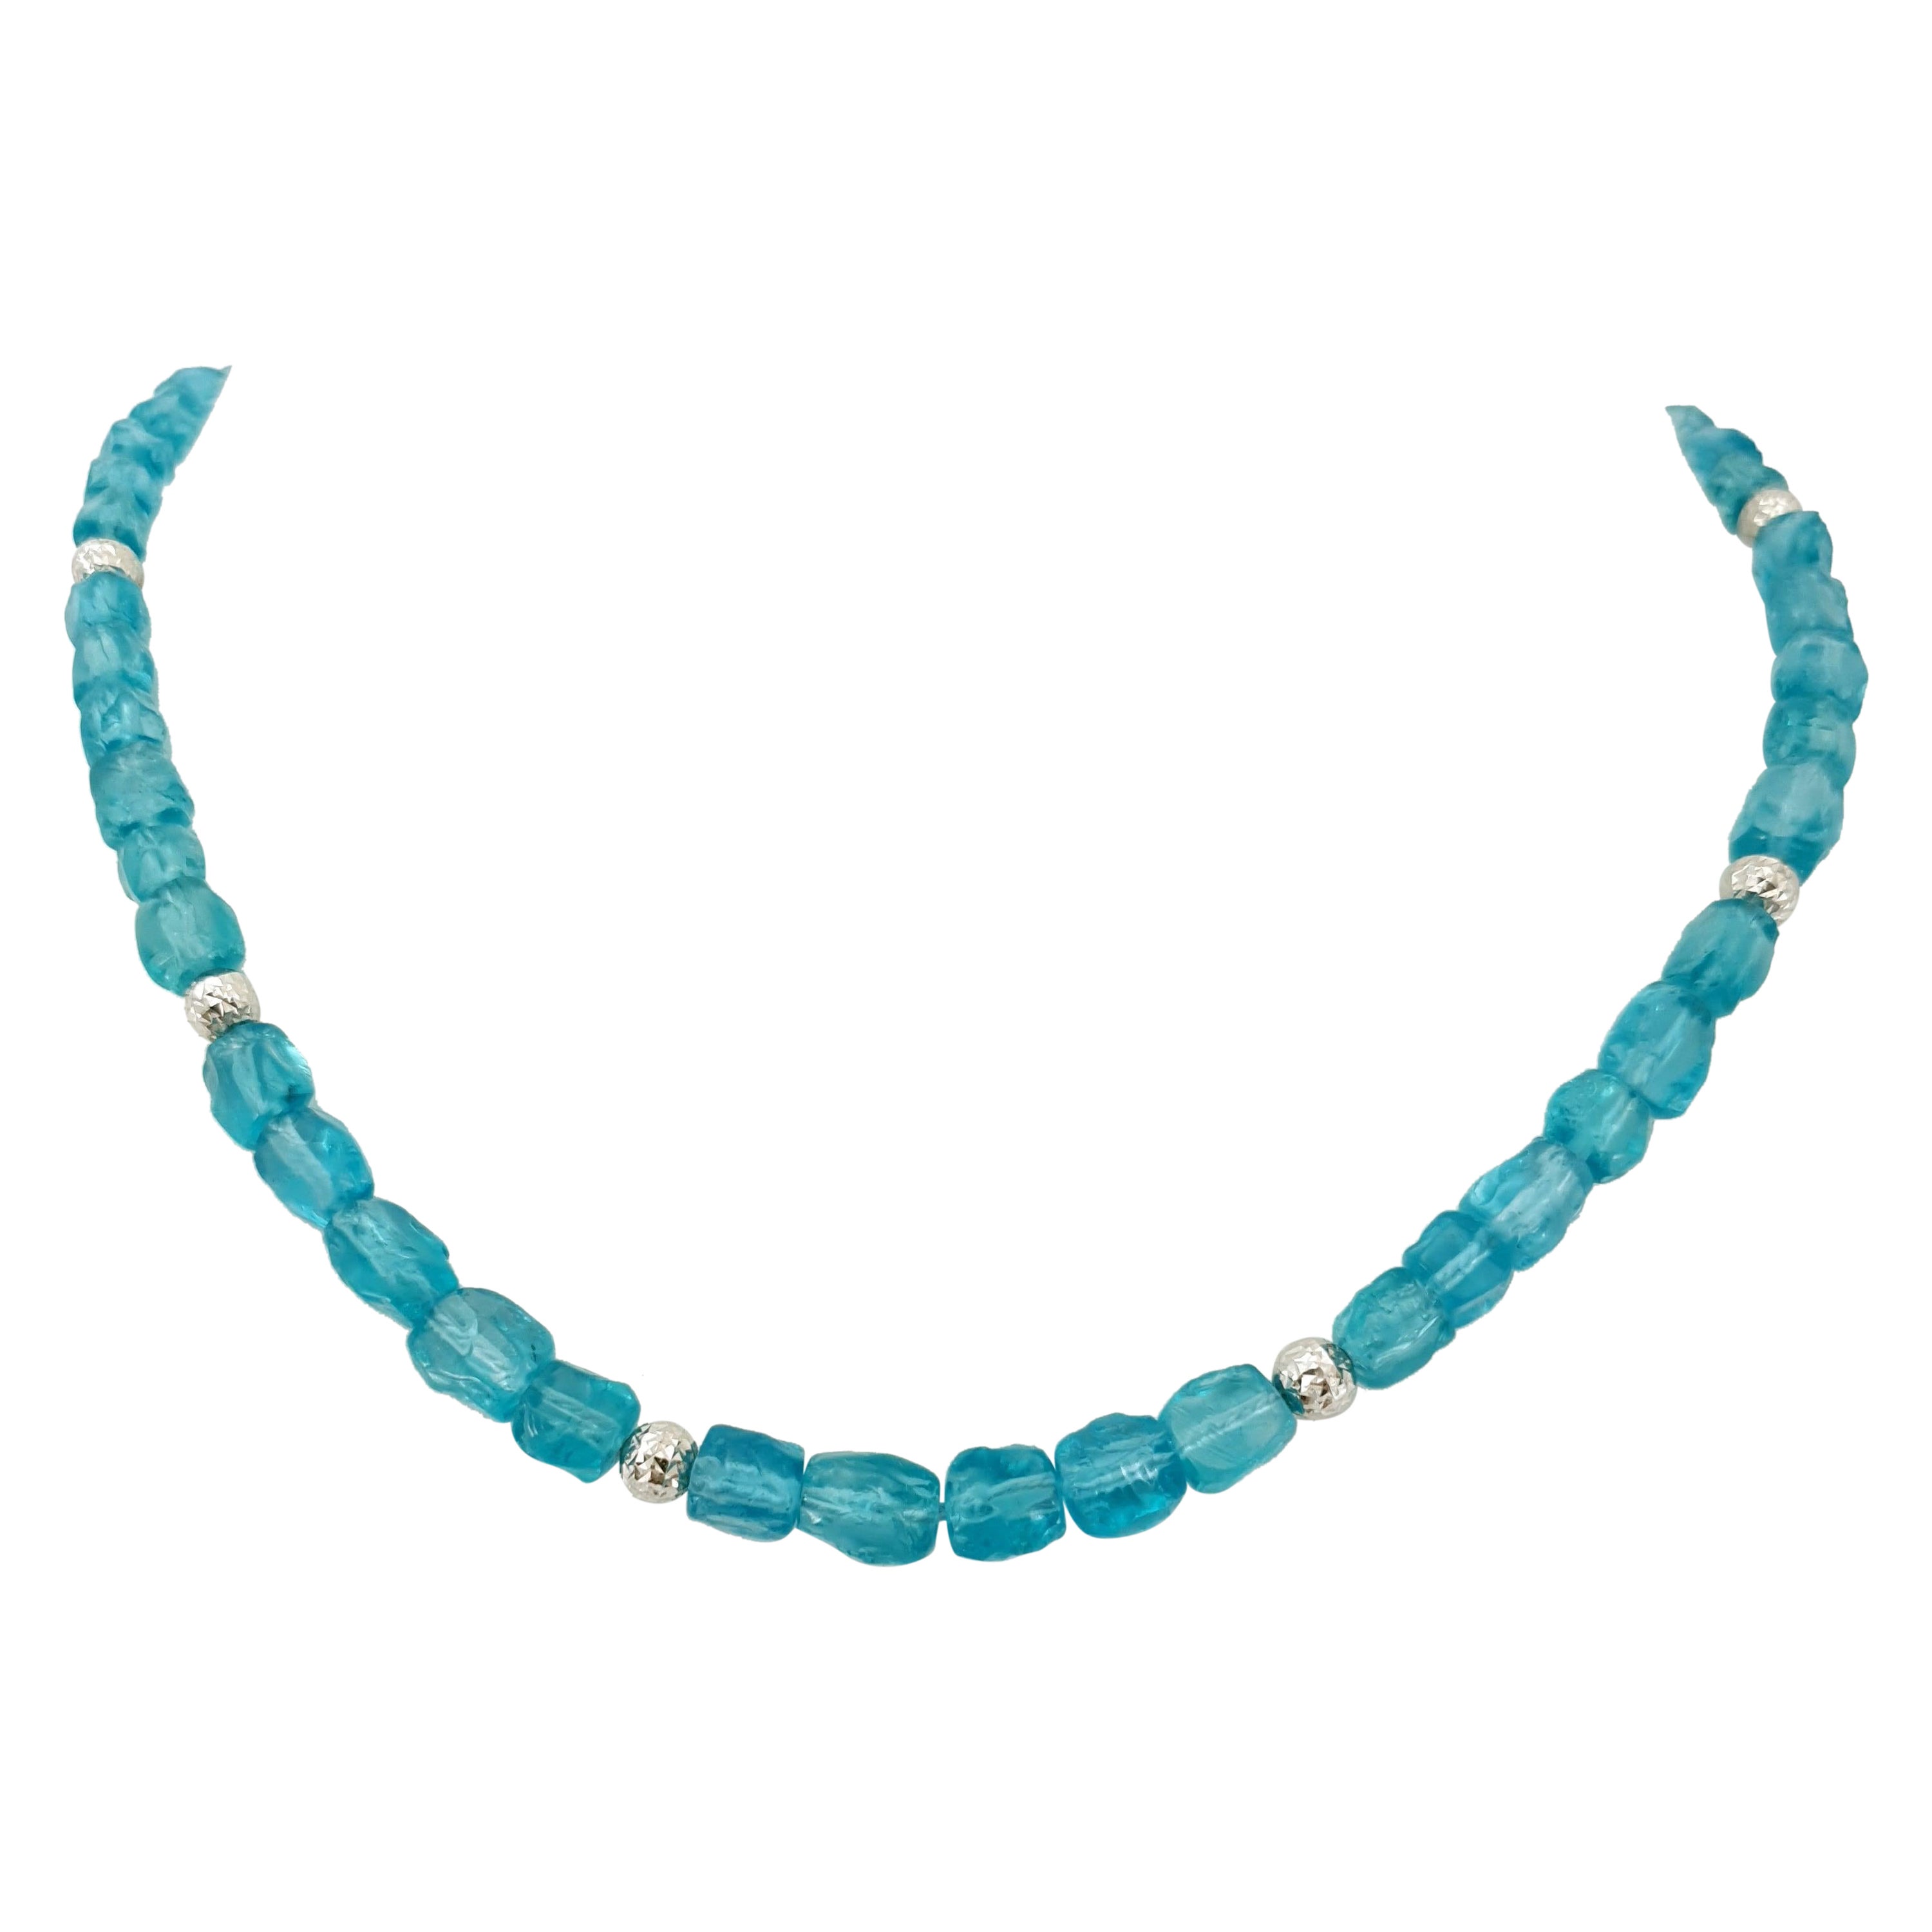 Paraiba Blue Apatite Nugget Beaded Necklace with 18 Carat White Gold 5